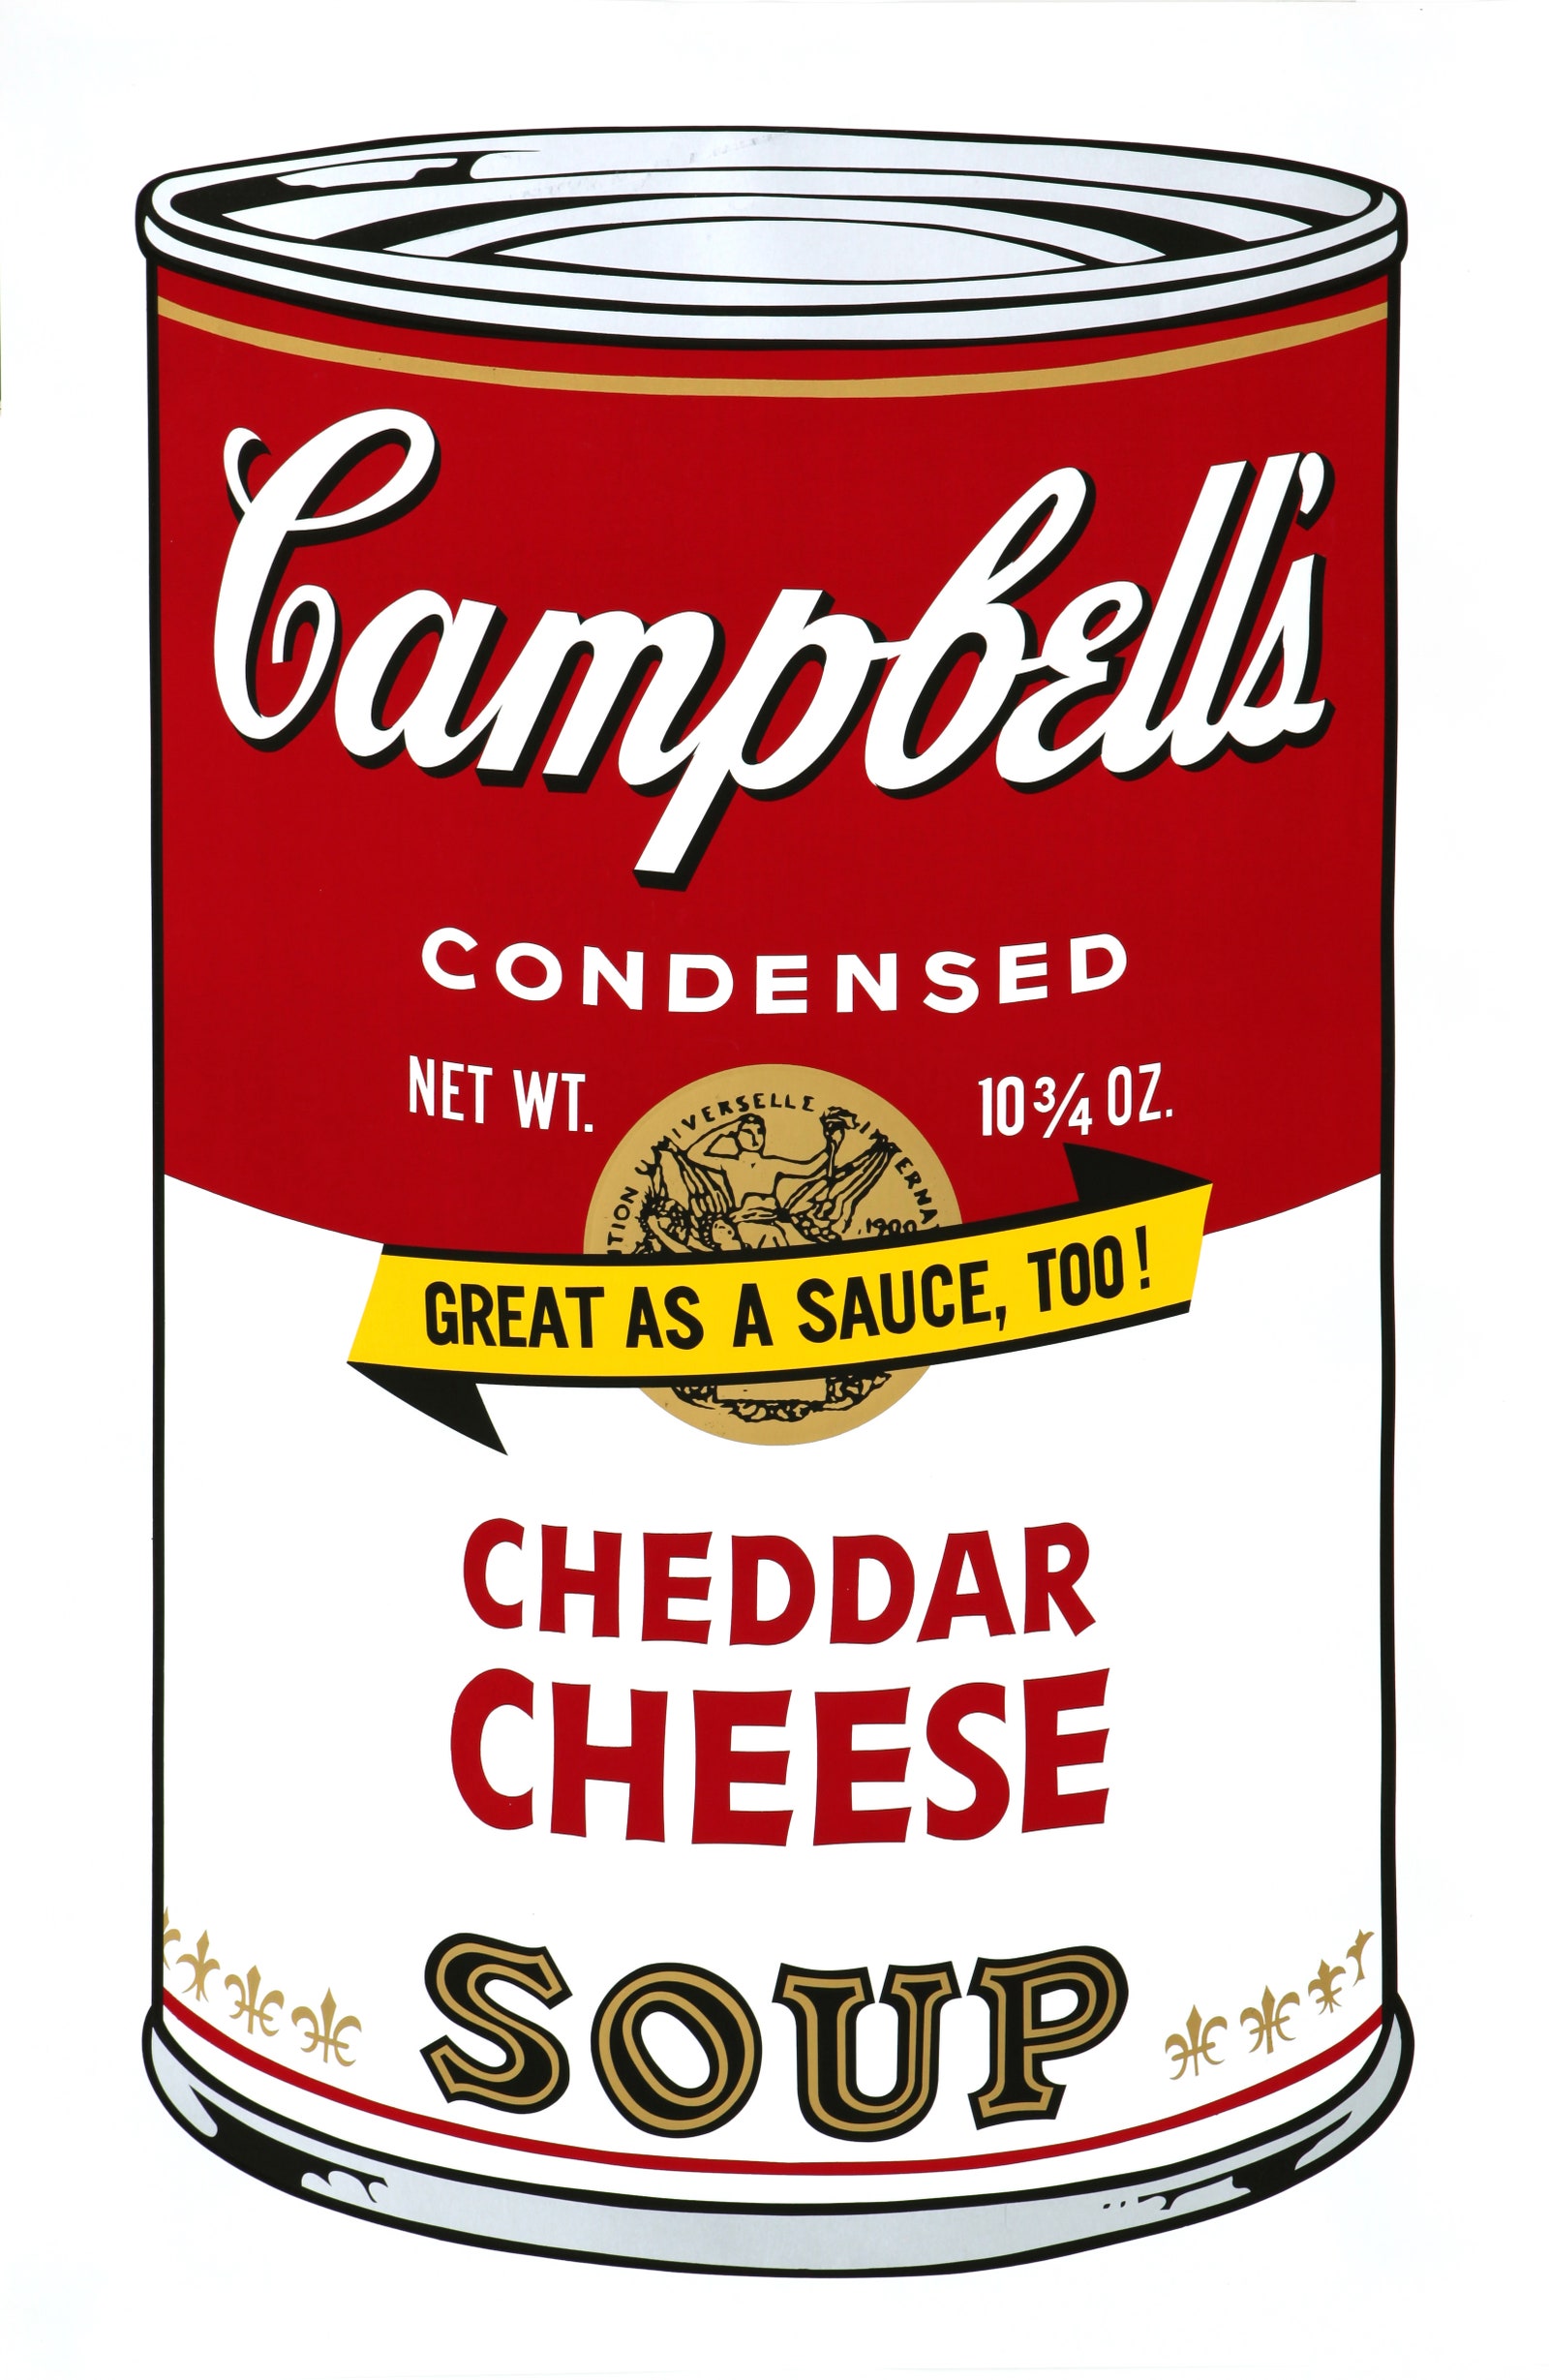 Campbells. All Andy Warhol artwork © 2018 The Andy Warhol Foundation for the Visual Arts